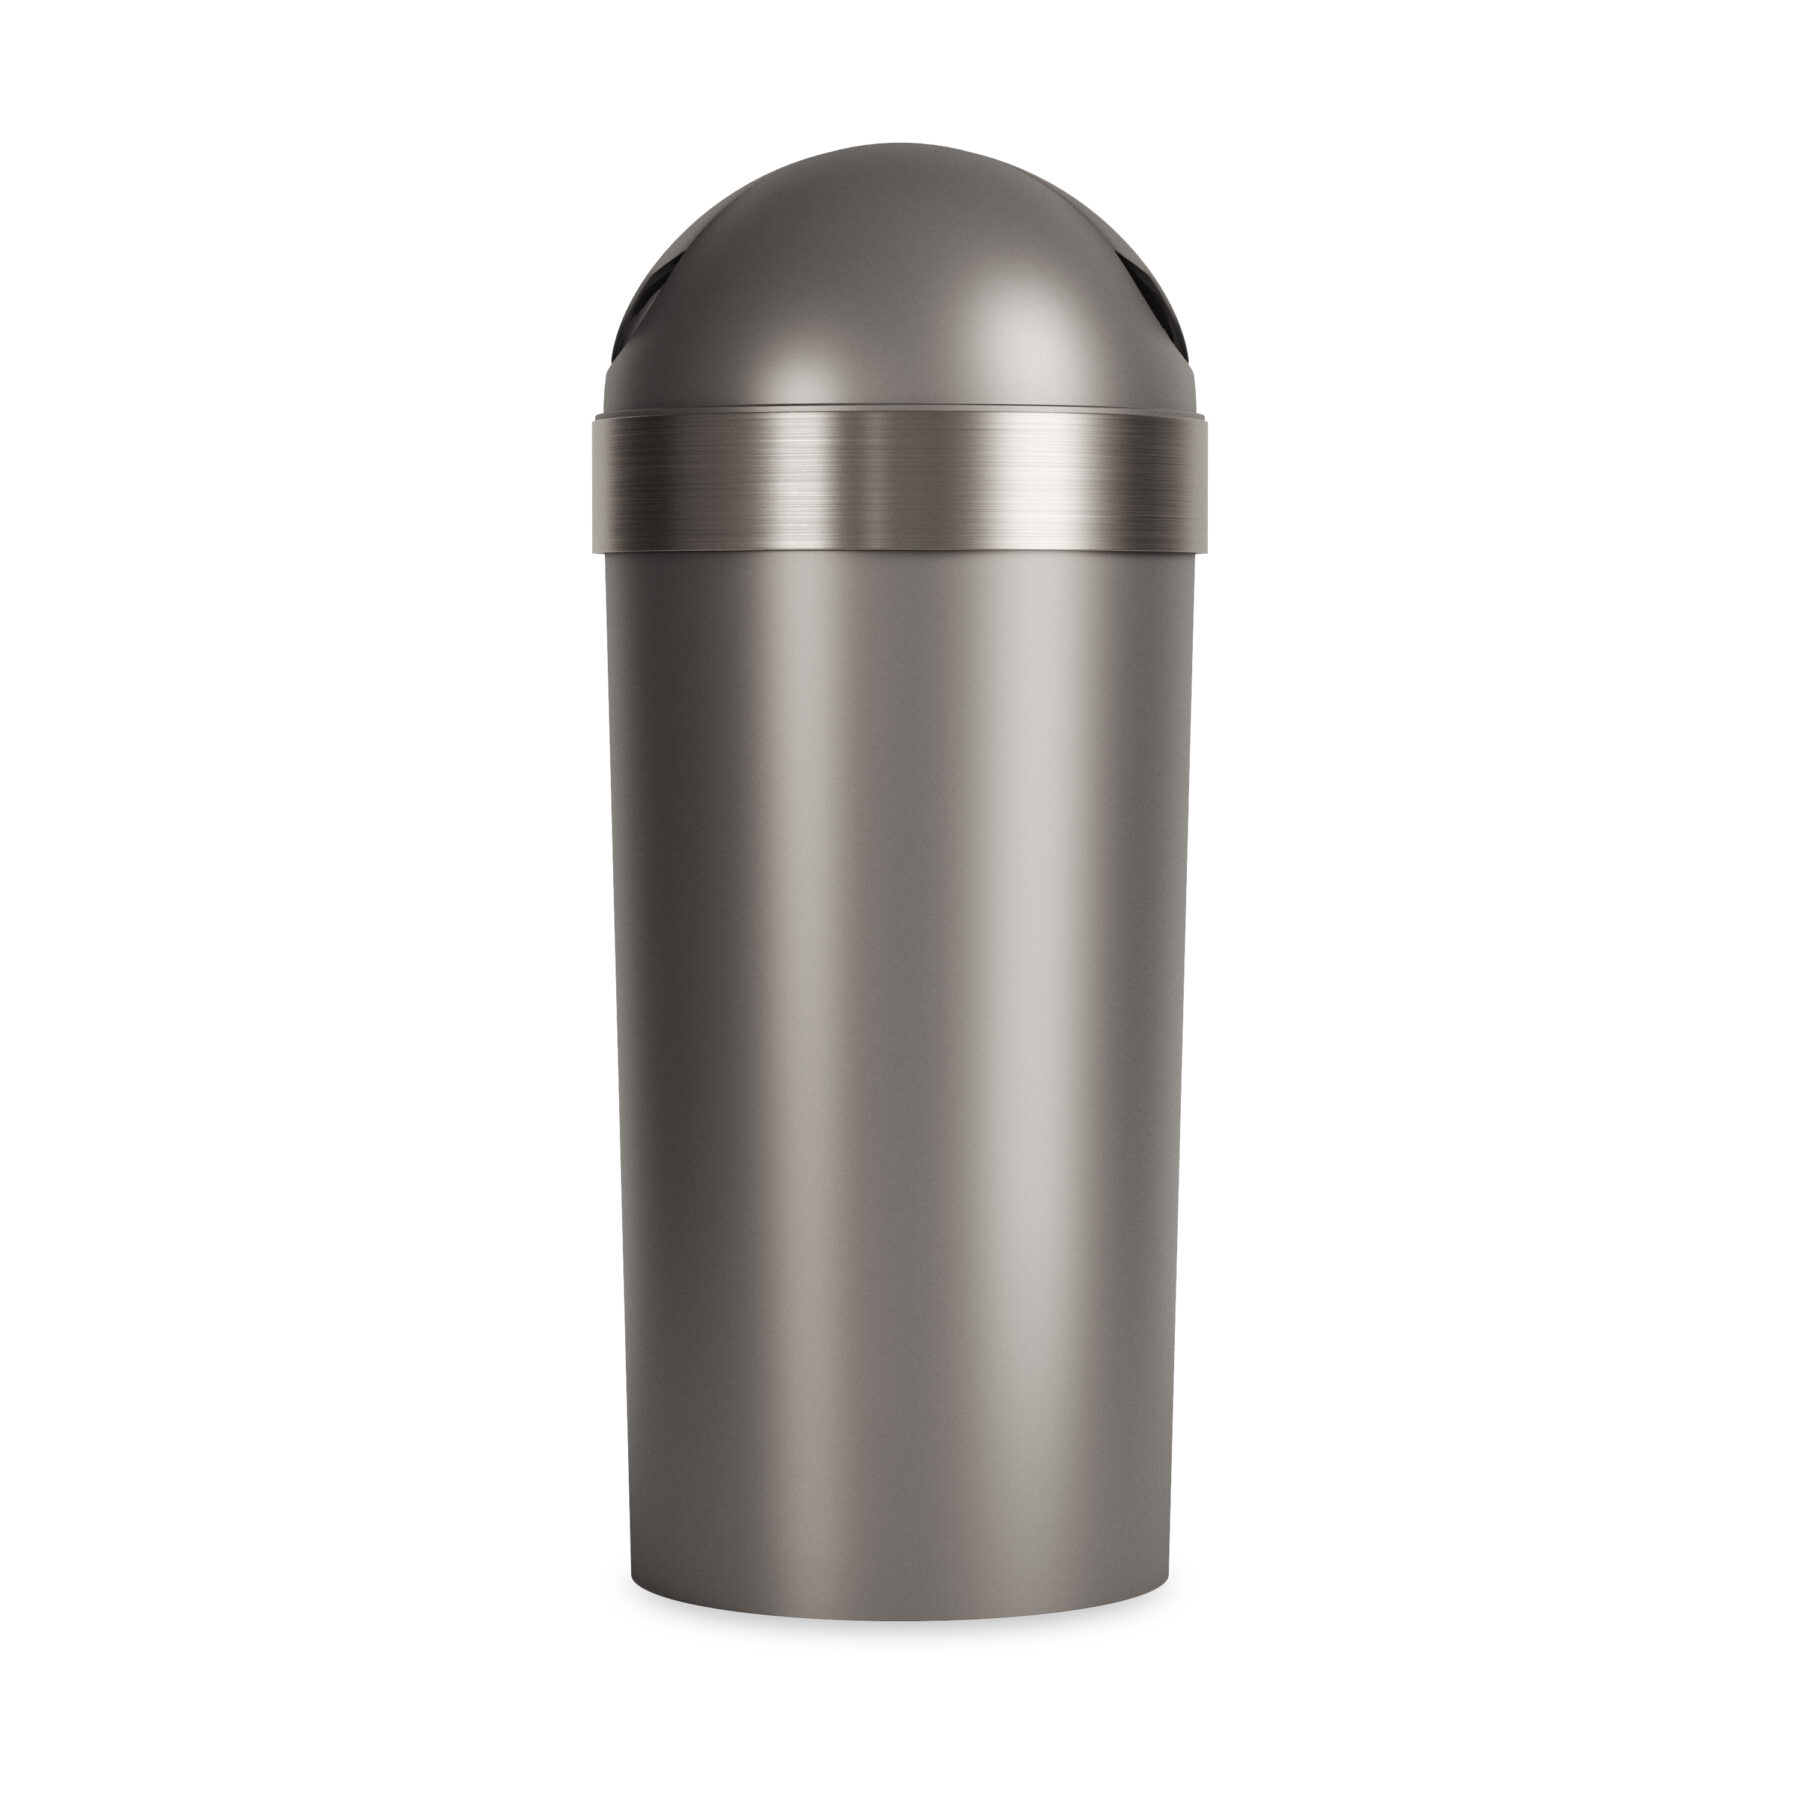 Venti keeps your waste out of sight. Venti Trash Can is sturdy